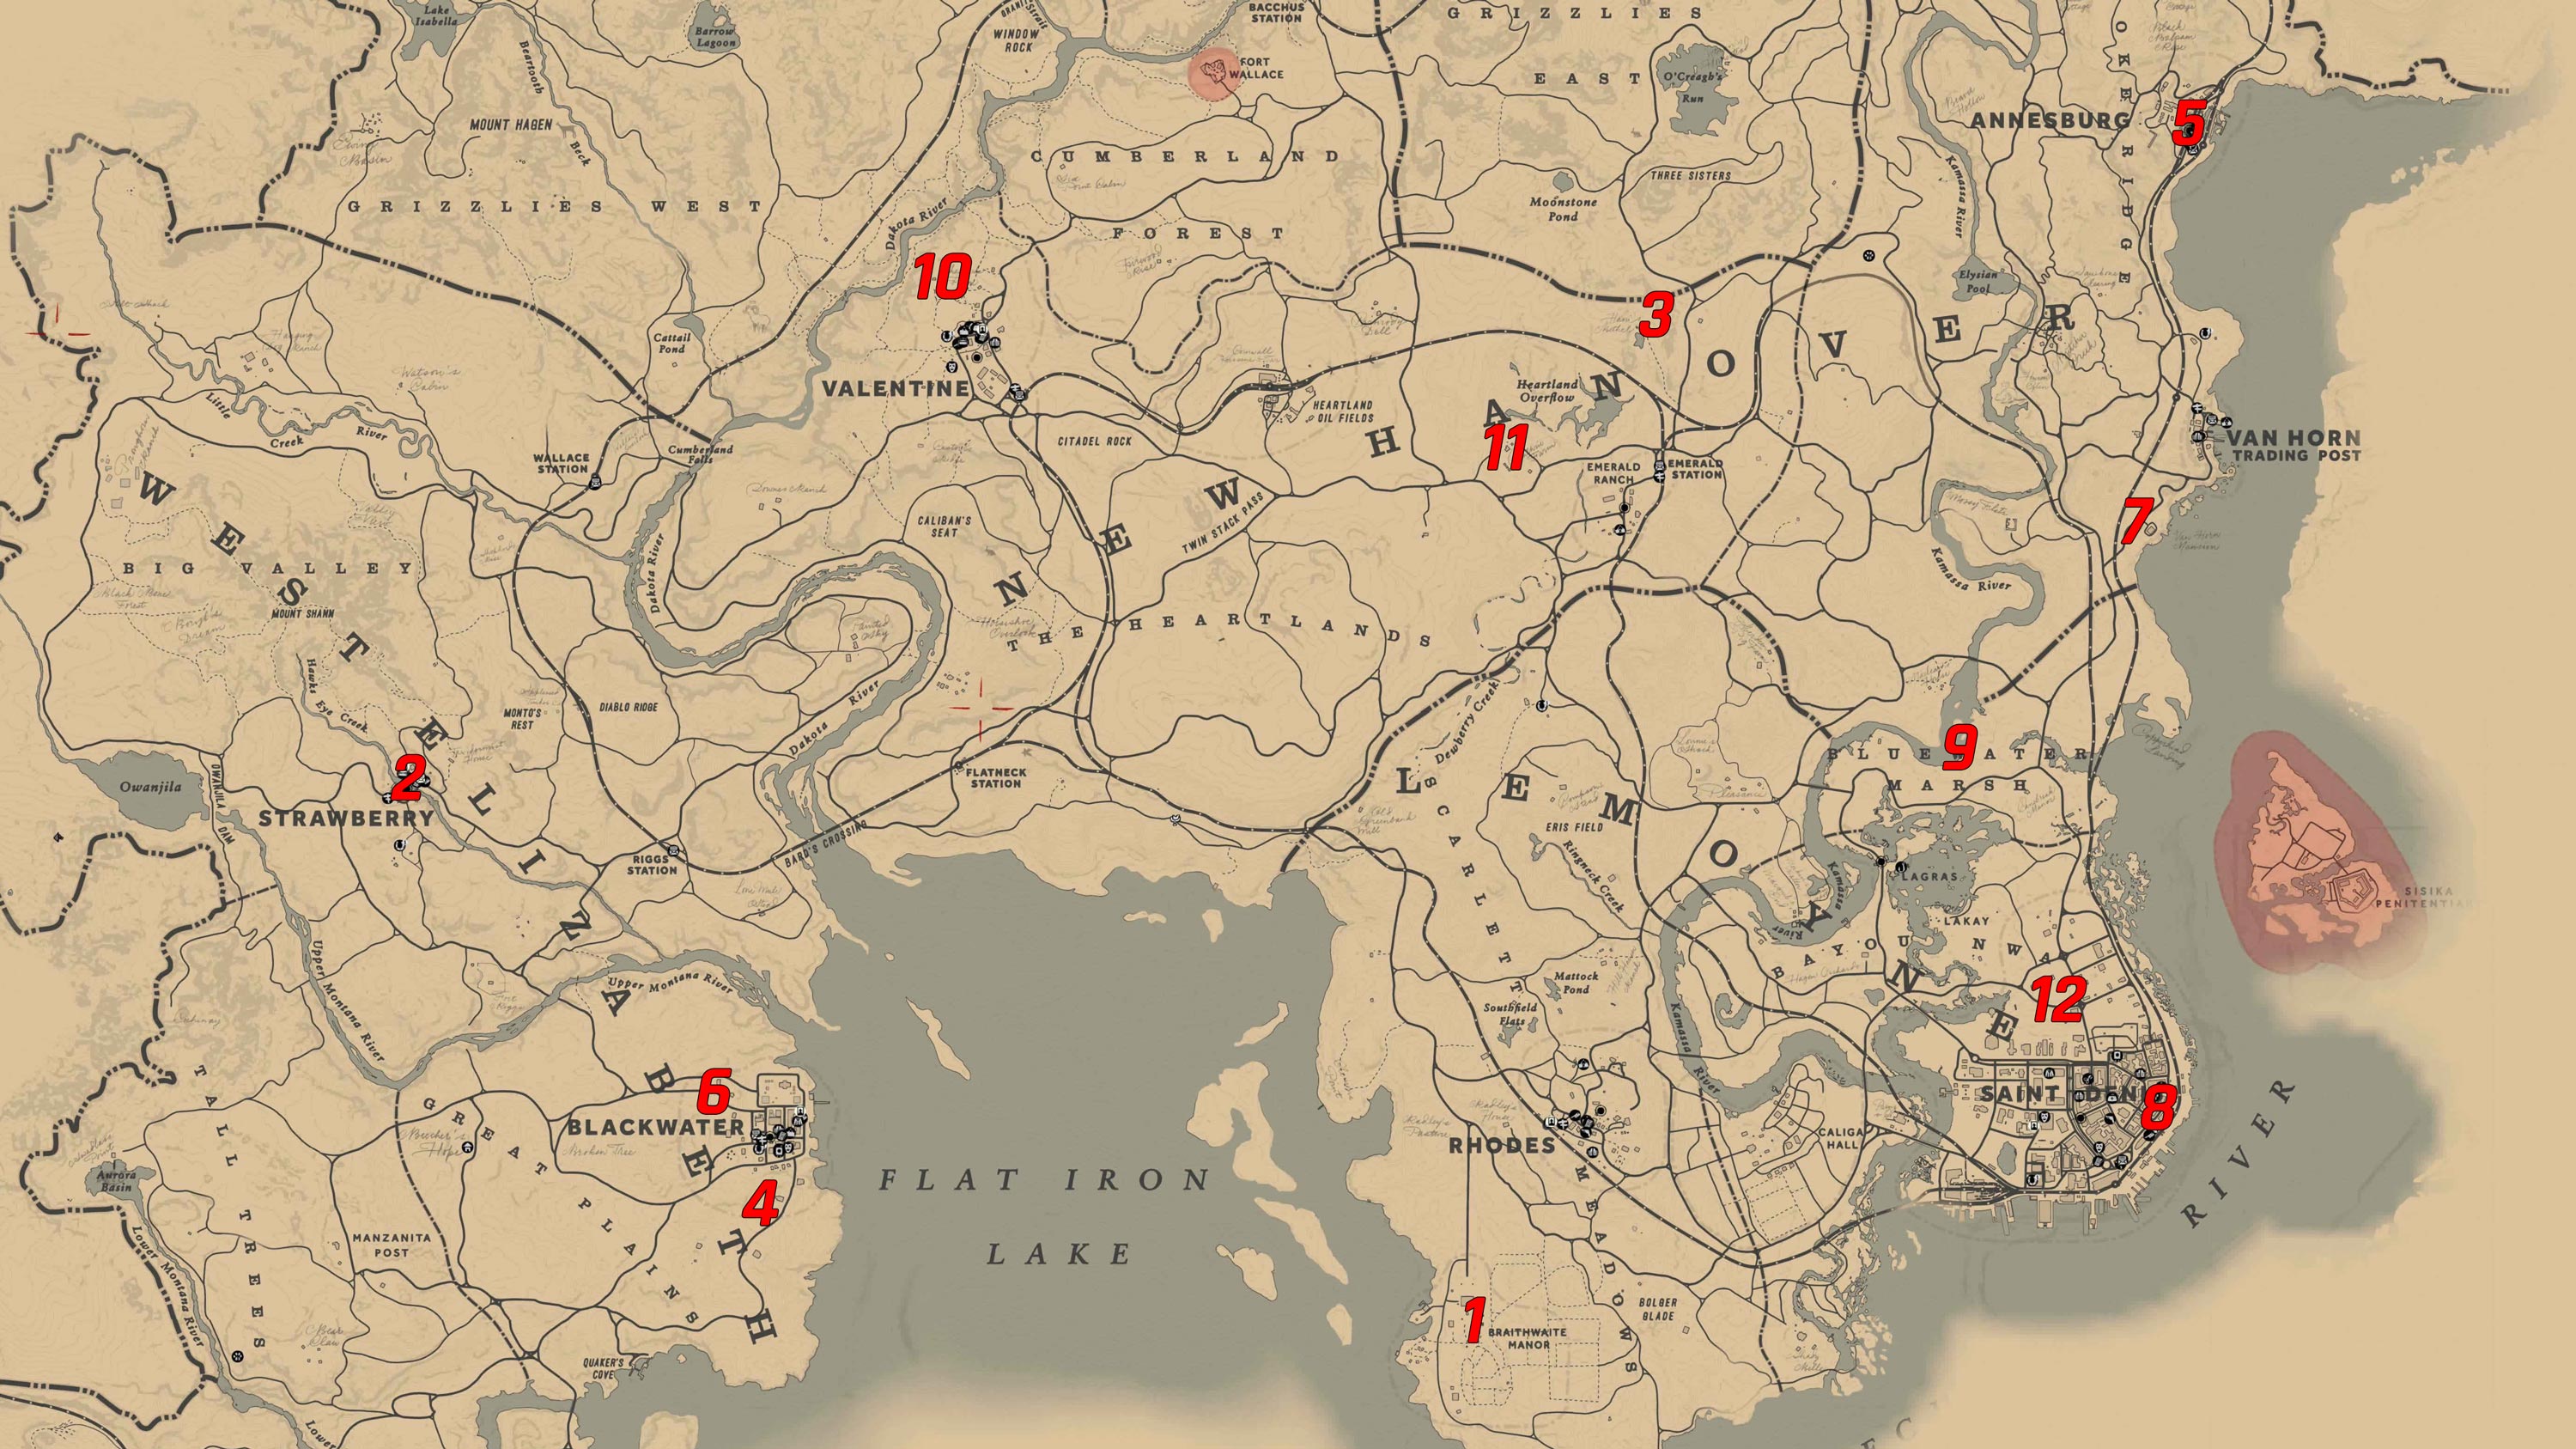 dead state map all locations